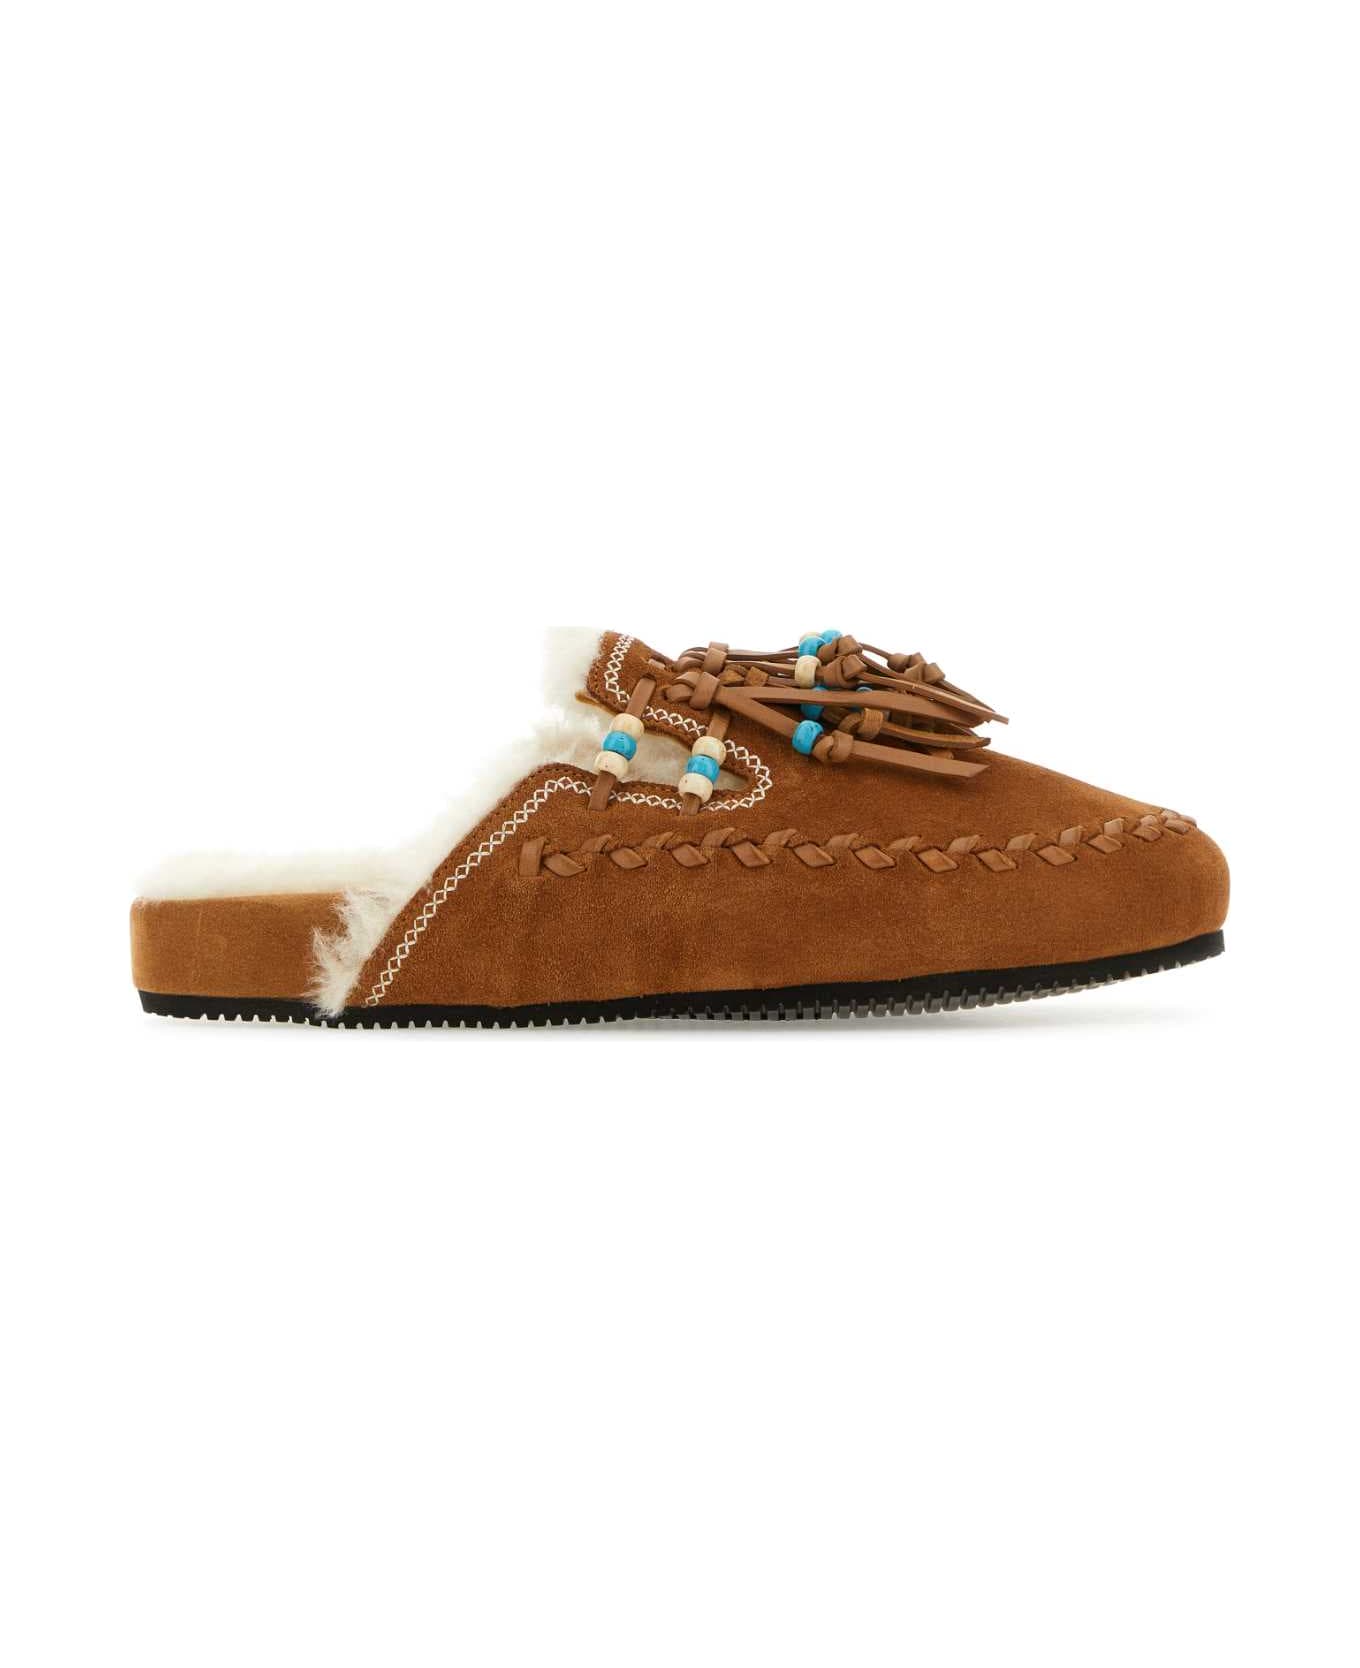 Alanui Brown Suede Leather The Journey Slippers - 6400 その他各種シューズ